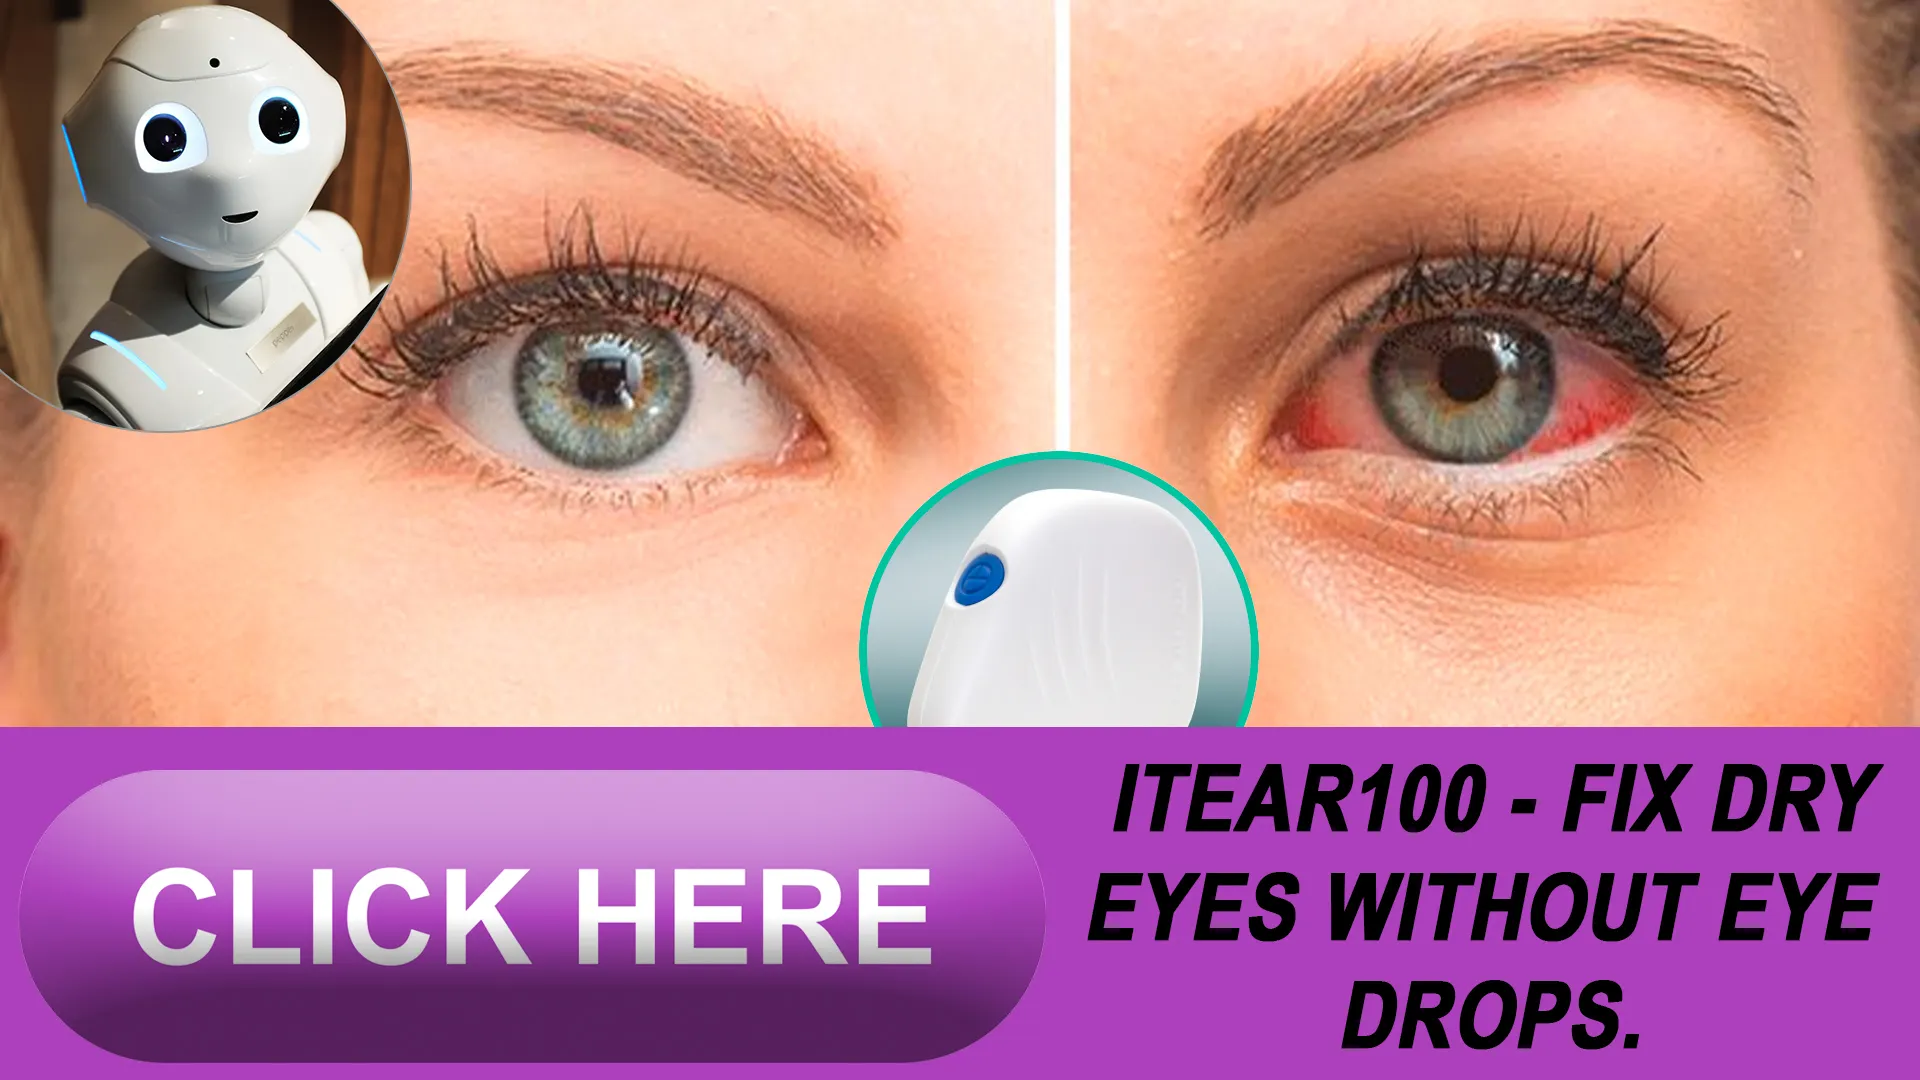 Strategies for Managing Dry Eye at Home